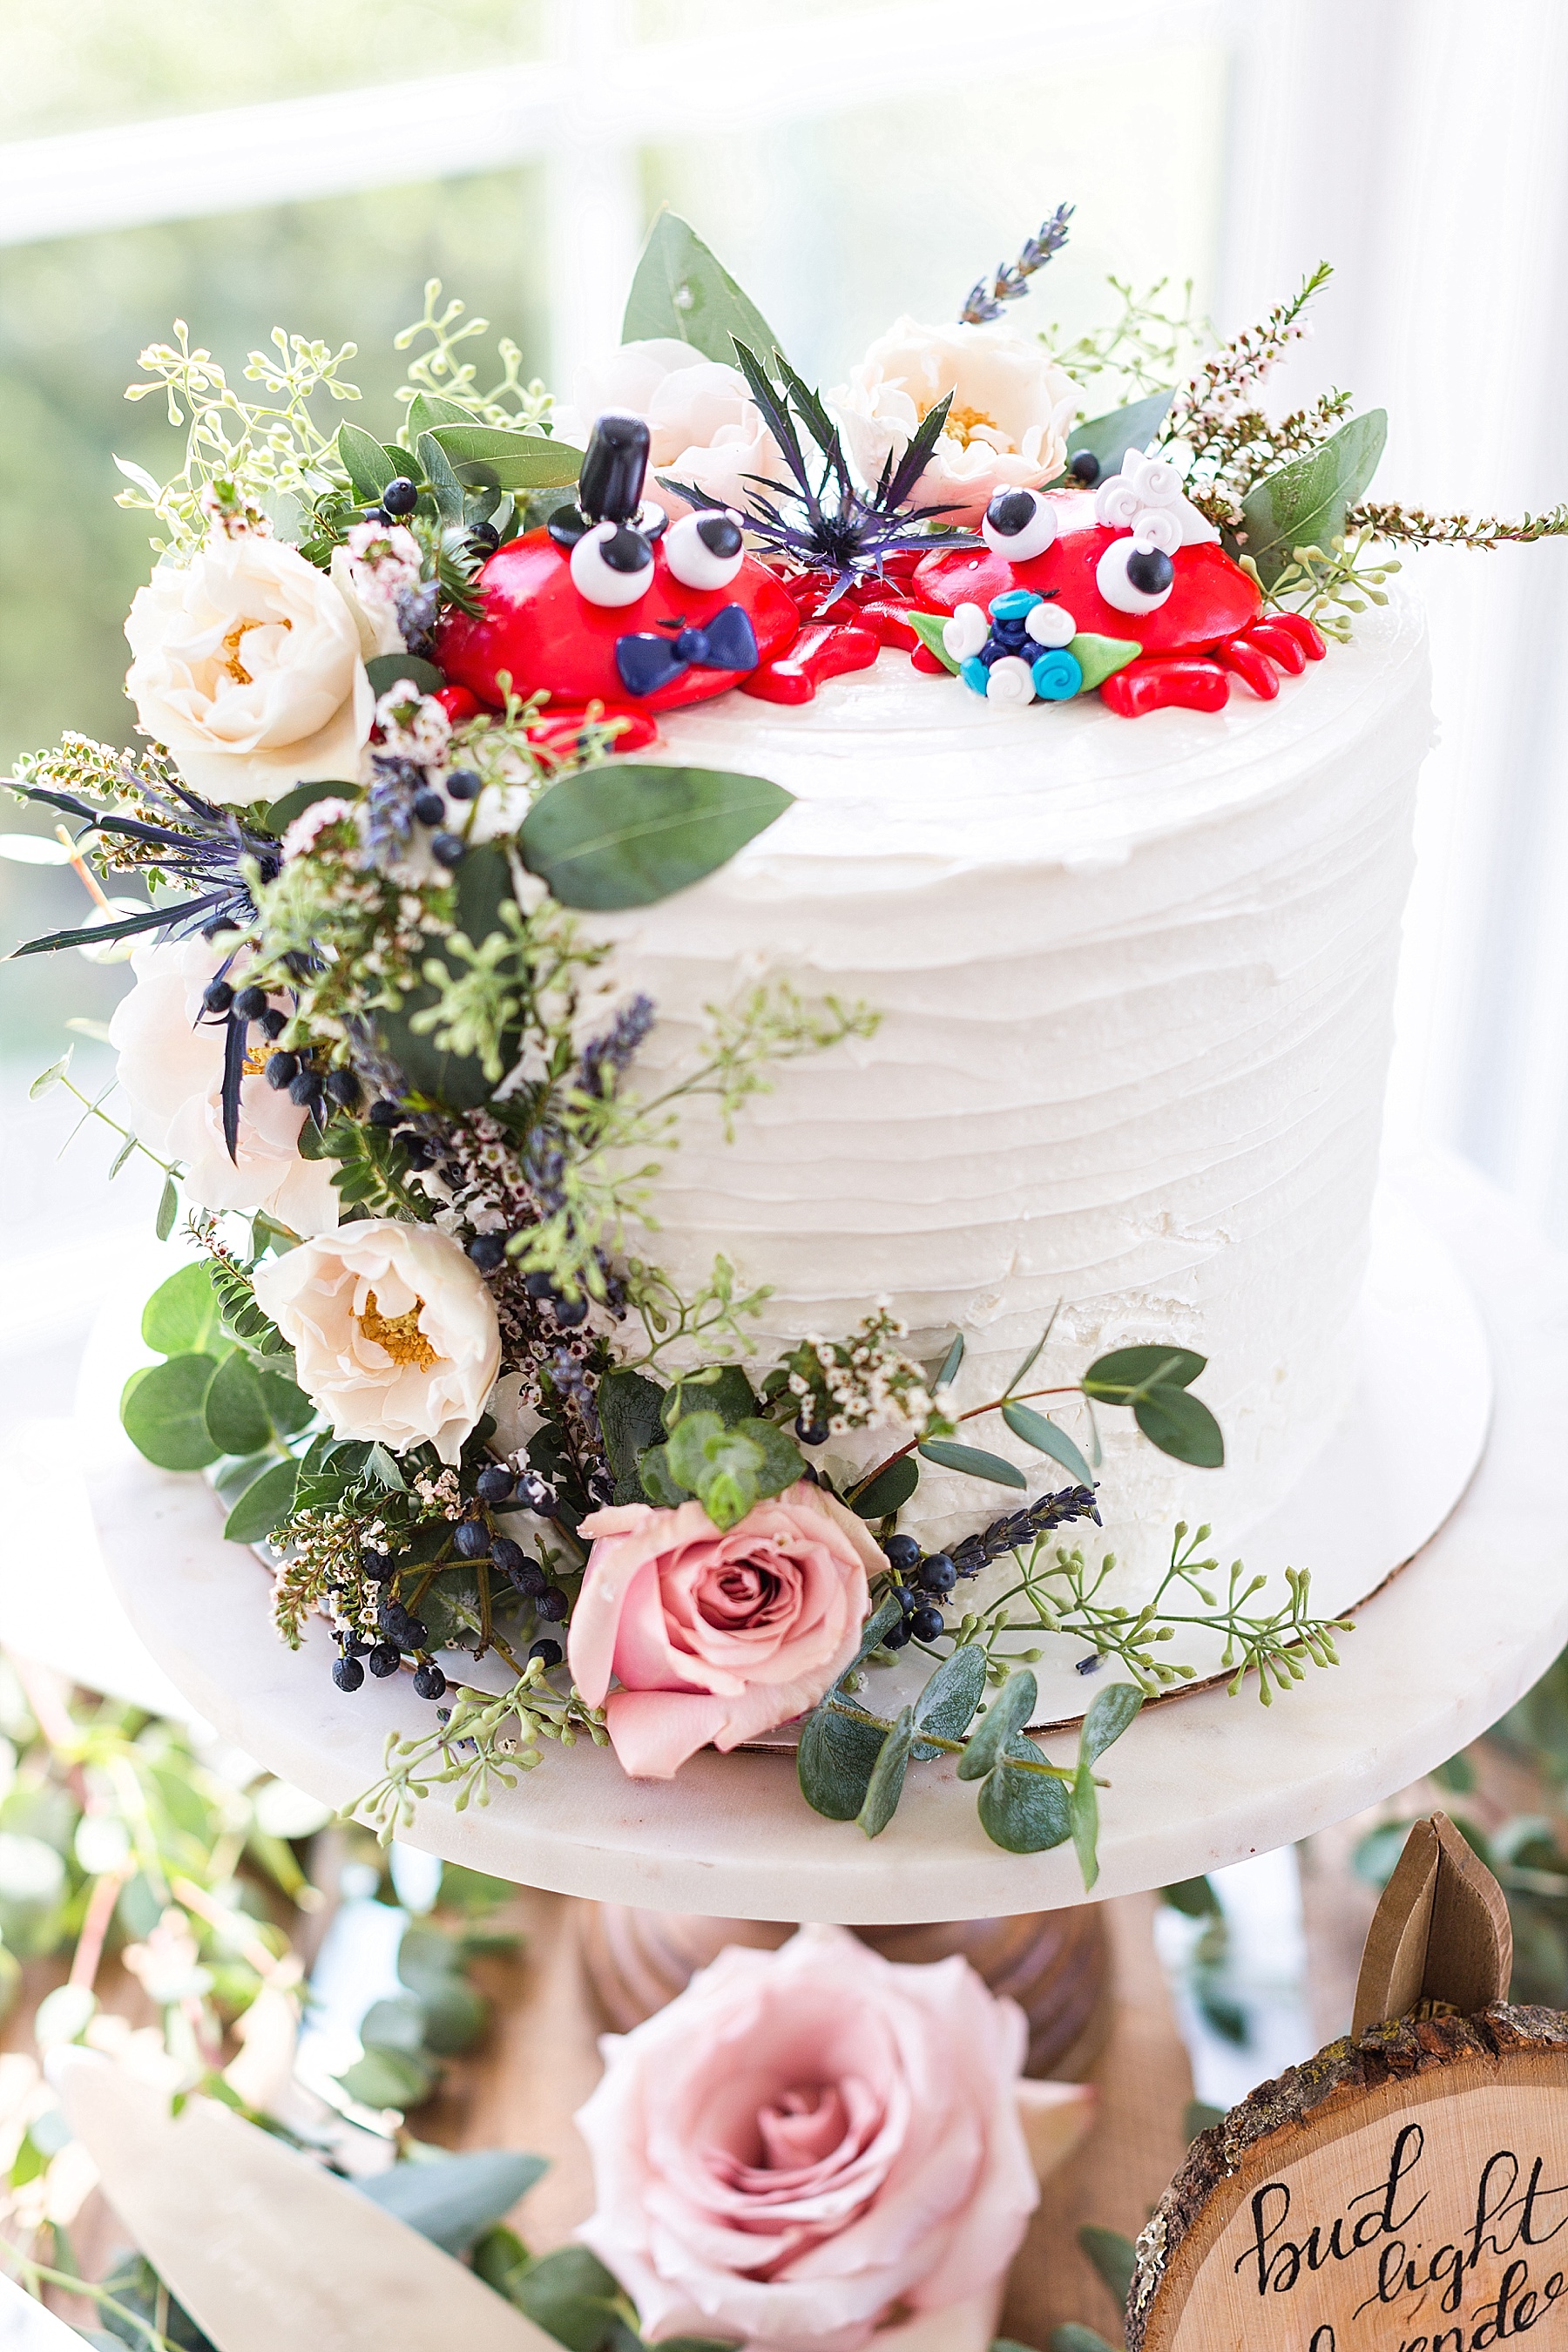 wedding cake by pastry chef photographed by Alexandra Mandato Photography